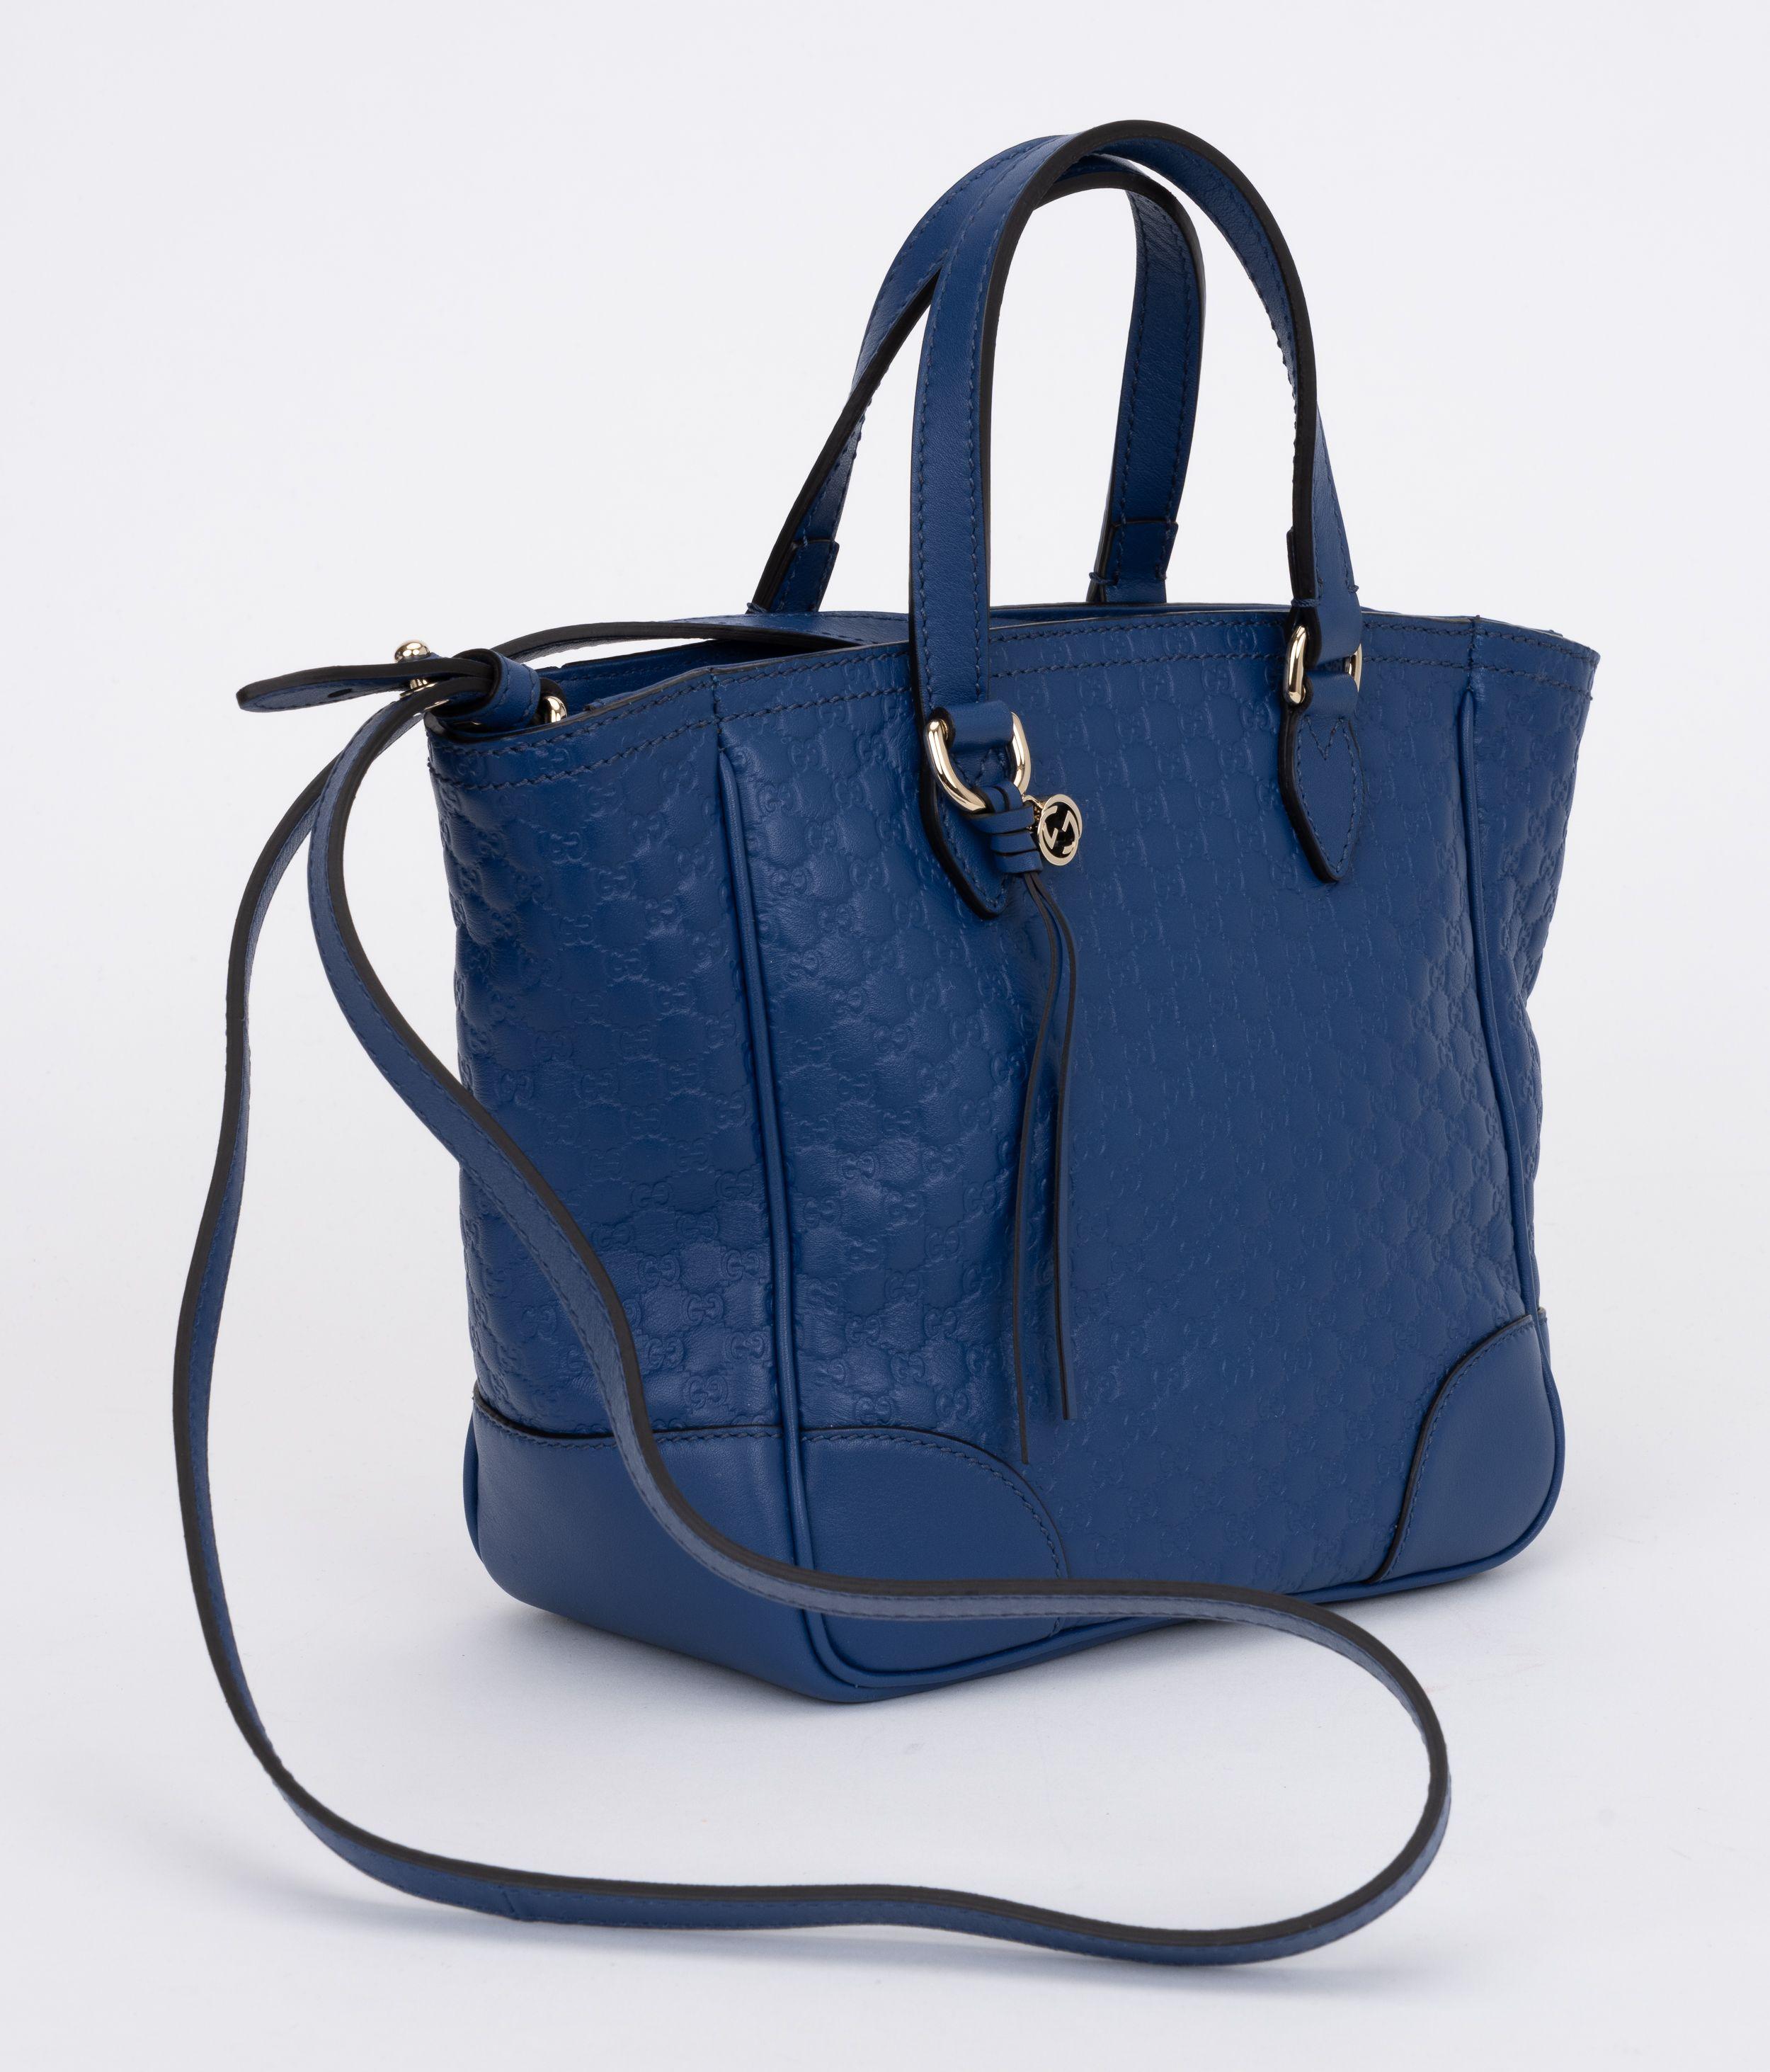 Gucci brand new blue leather handbag with multi logo embossed print. Handle drop 4